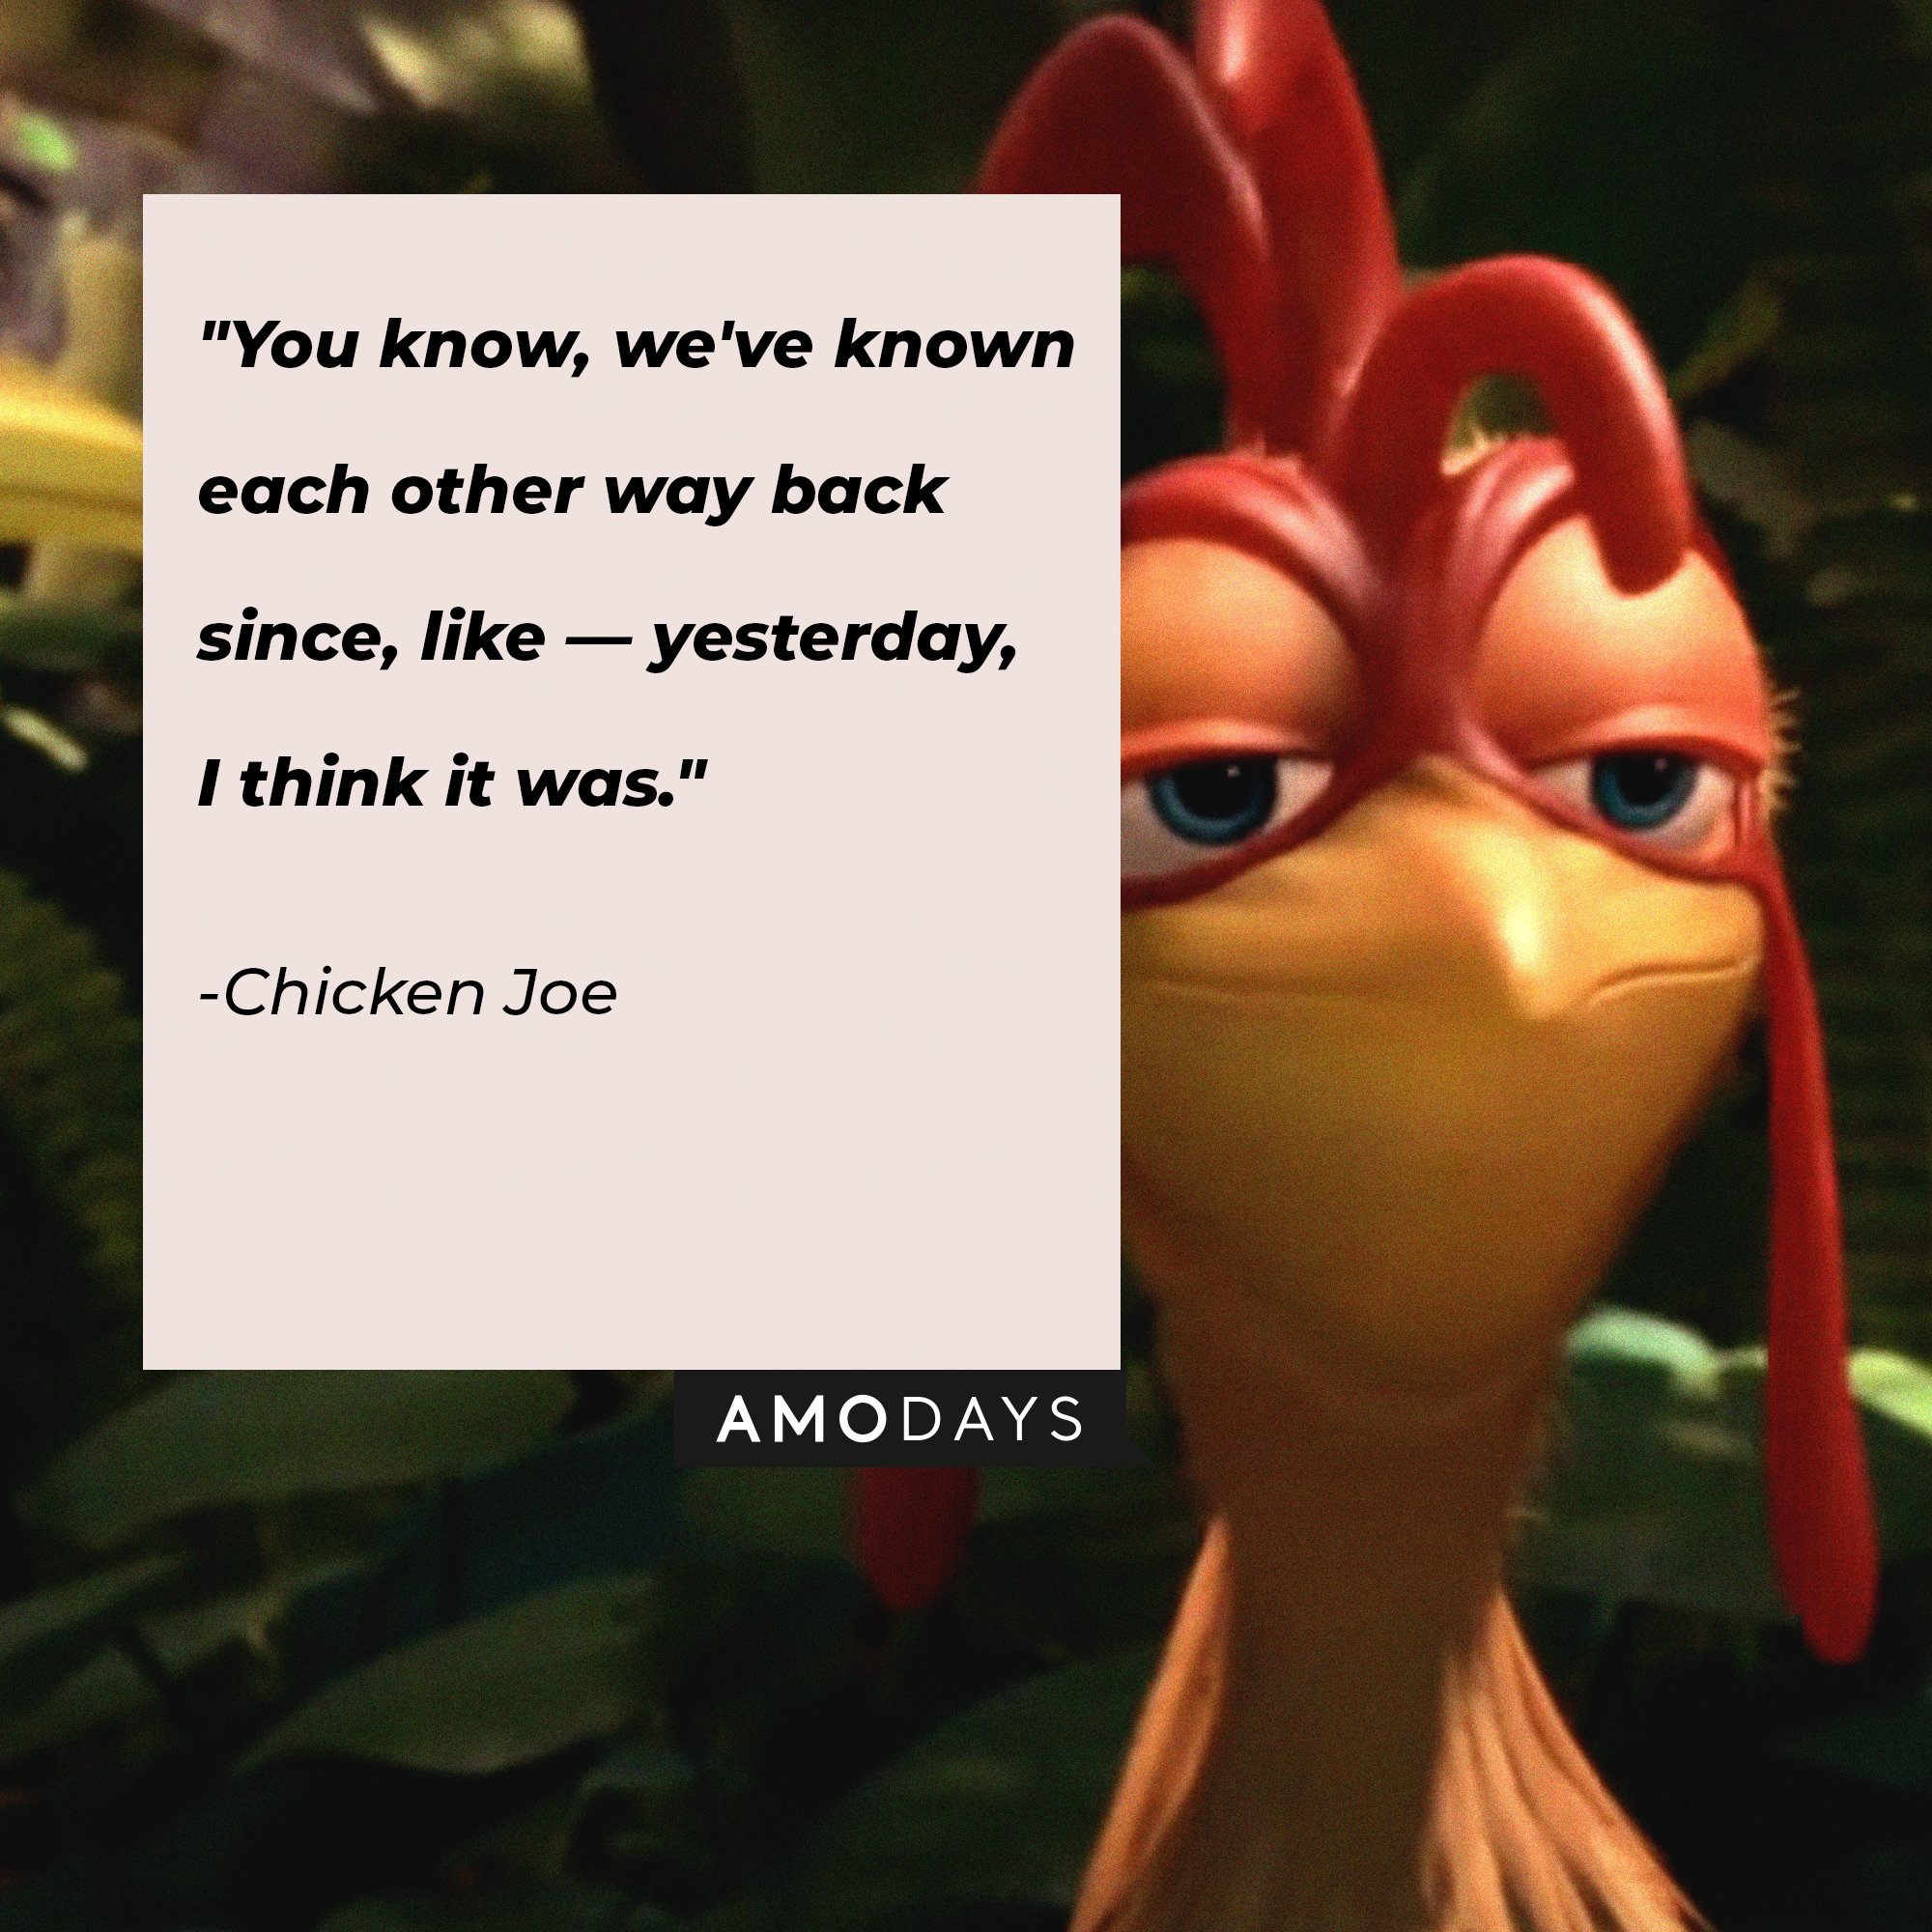 Chicken Joe's quote: "You know, we've known each other way back since, like — yesterday, I think it was.” | Image: AmoDays